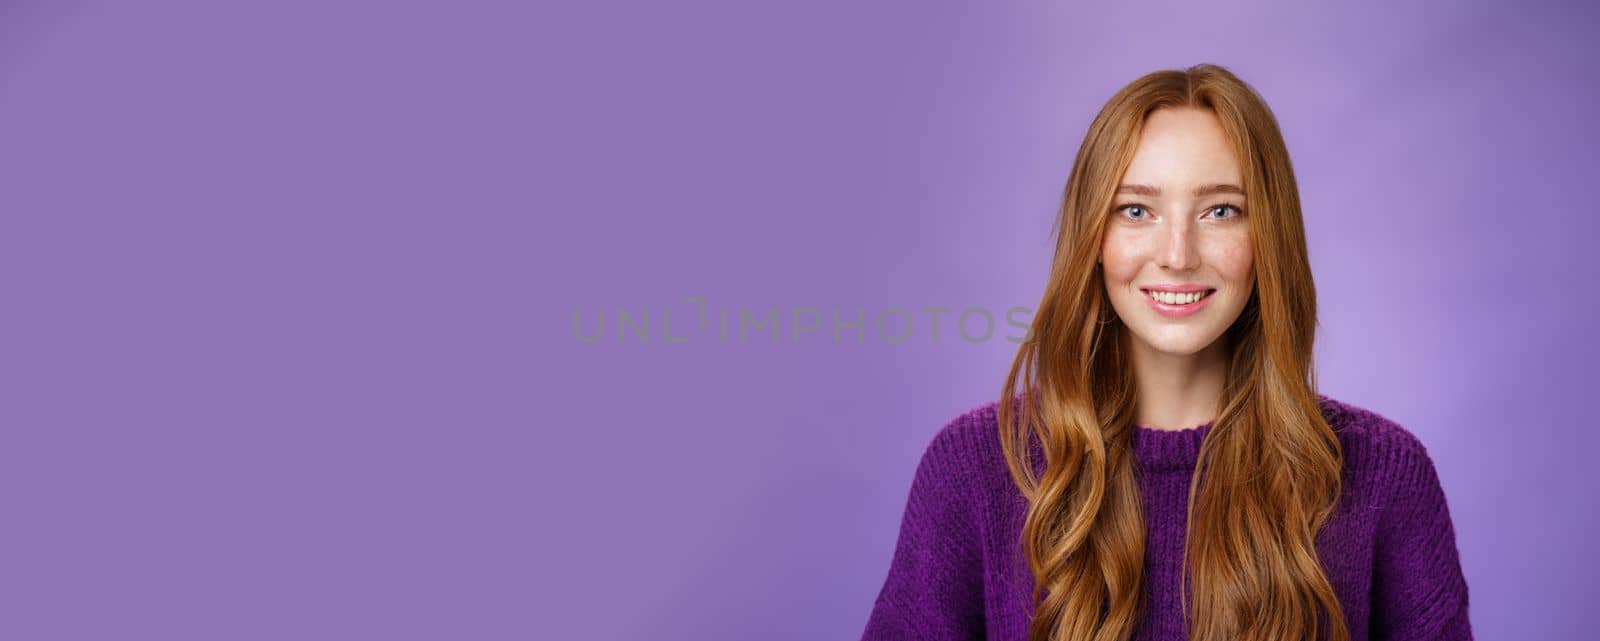 Lifestyle. Close-up shot of hopeful and optimistic happy young redhead 20s girl with freckles and long hair smiling joyfully with faith in eyes and prominent look posing against purple background.